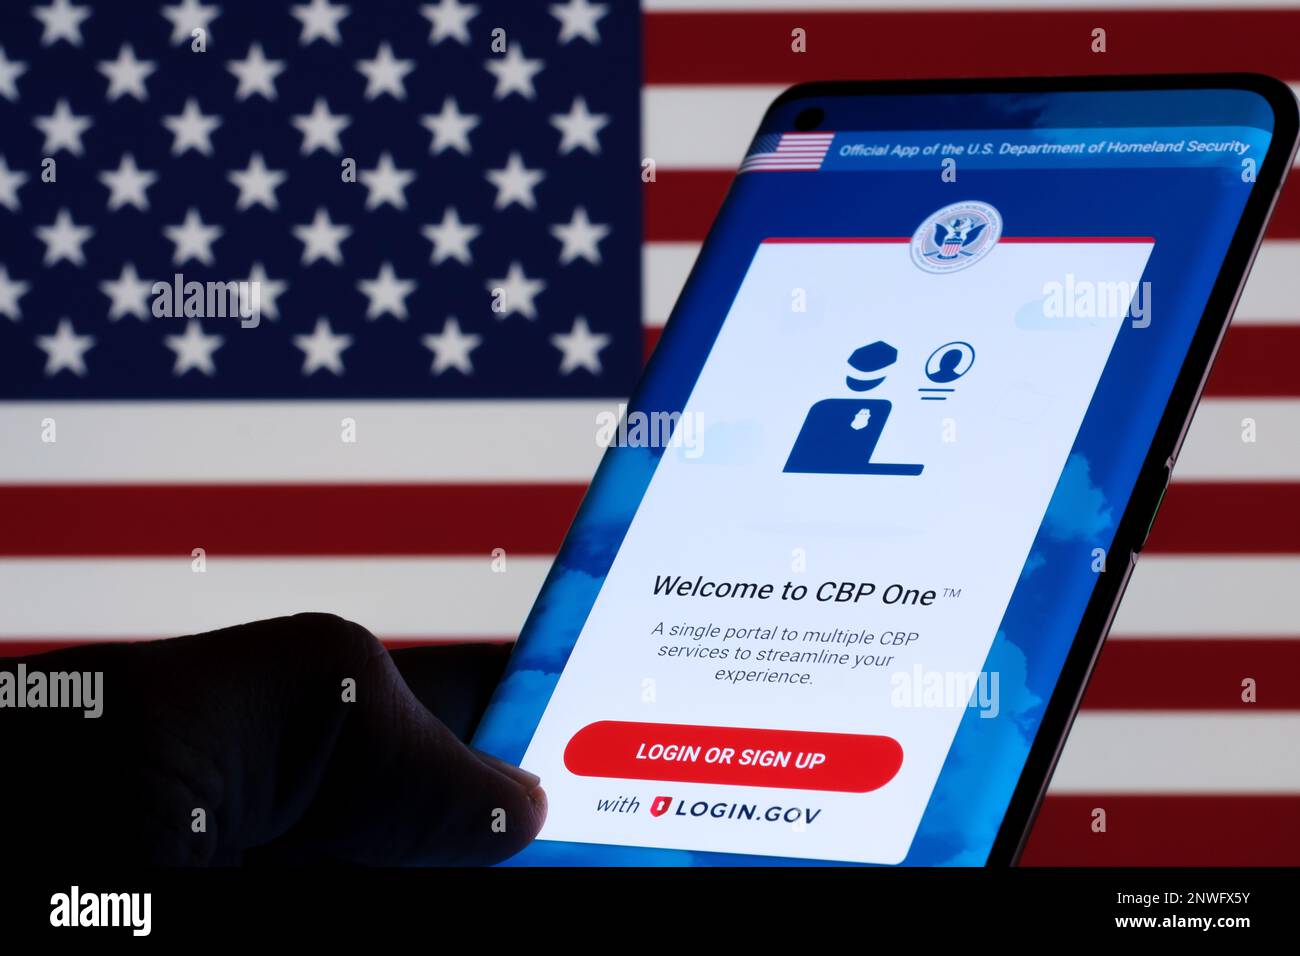 CBP One app seen on smartphone screen. U.S. Customs and Border Protection app. Official portal of the U.S. Department of Homeland Security. Stafford, Stock Photo